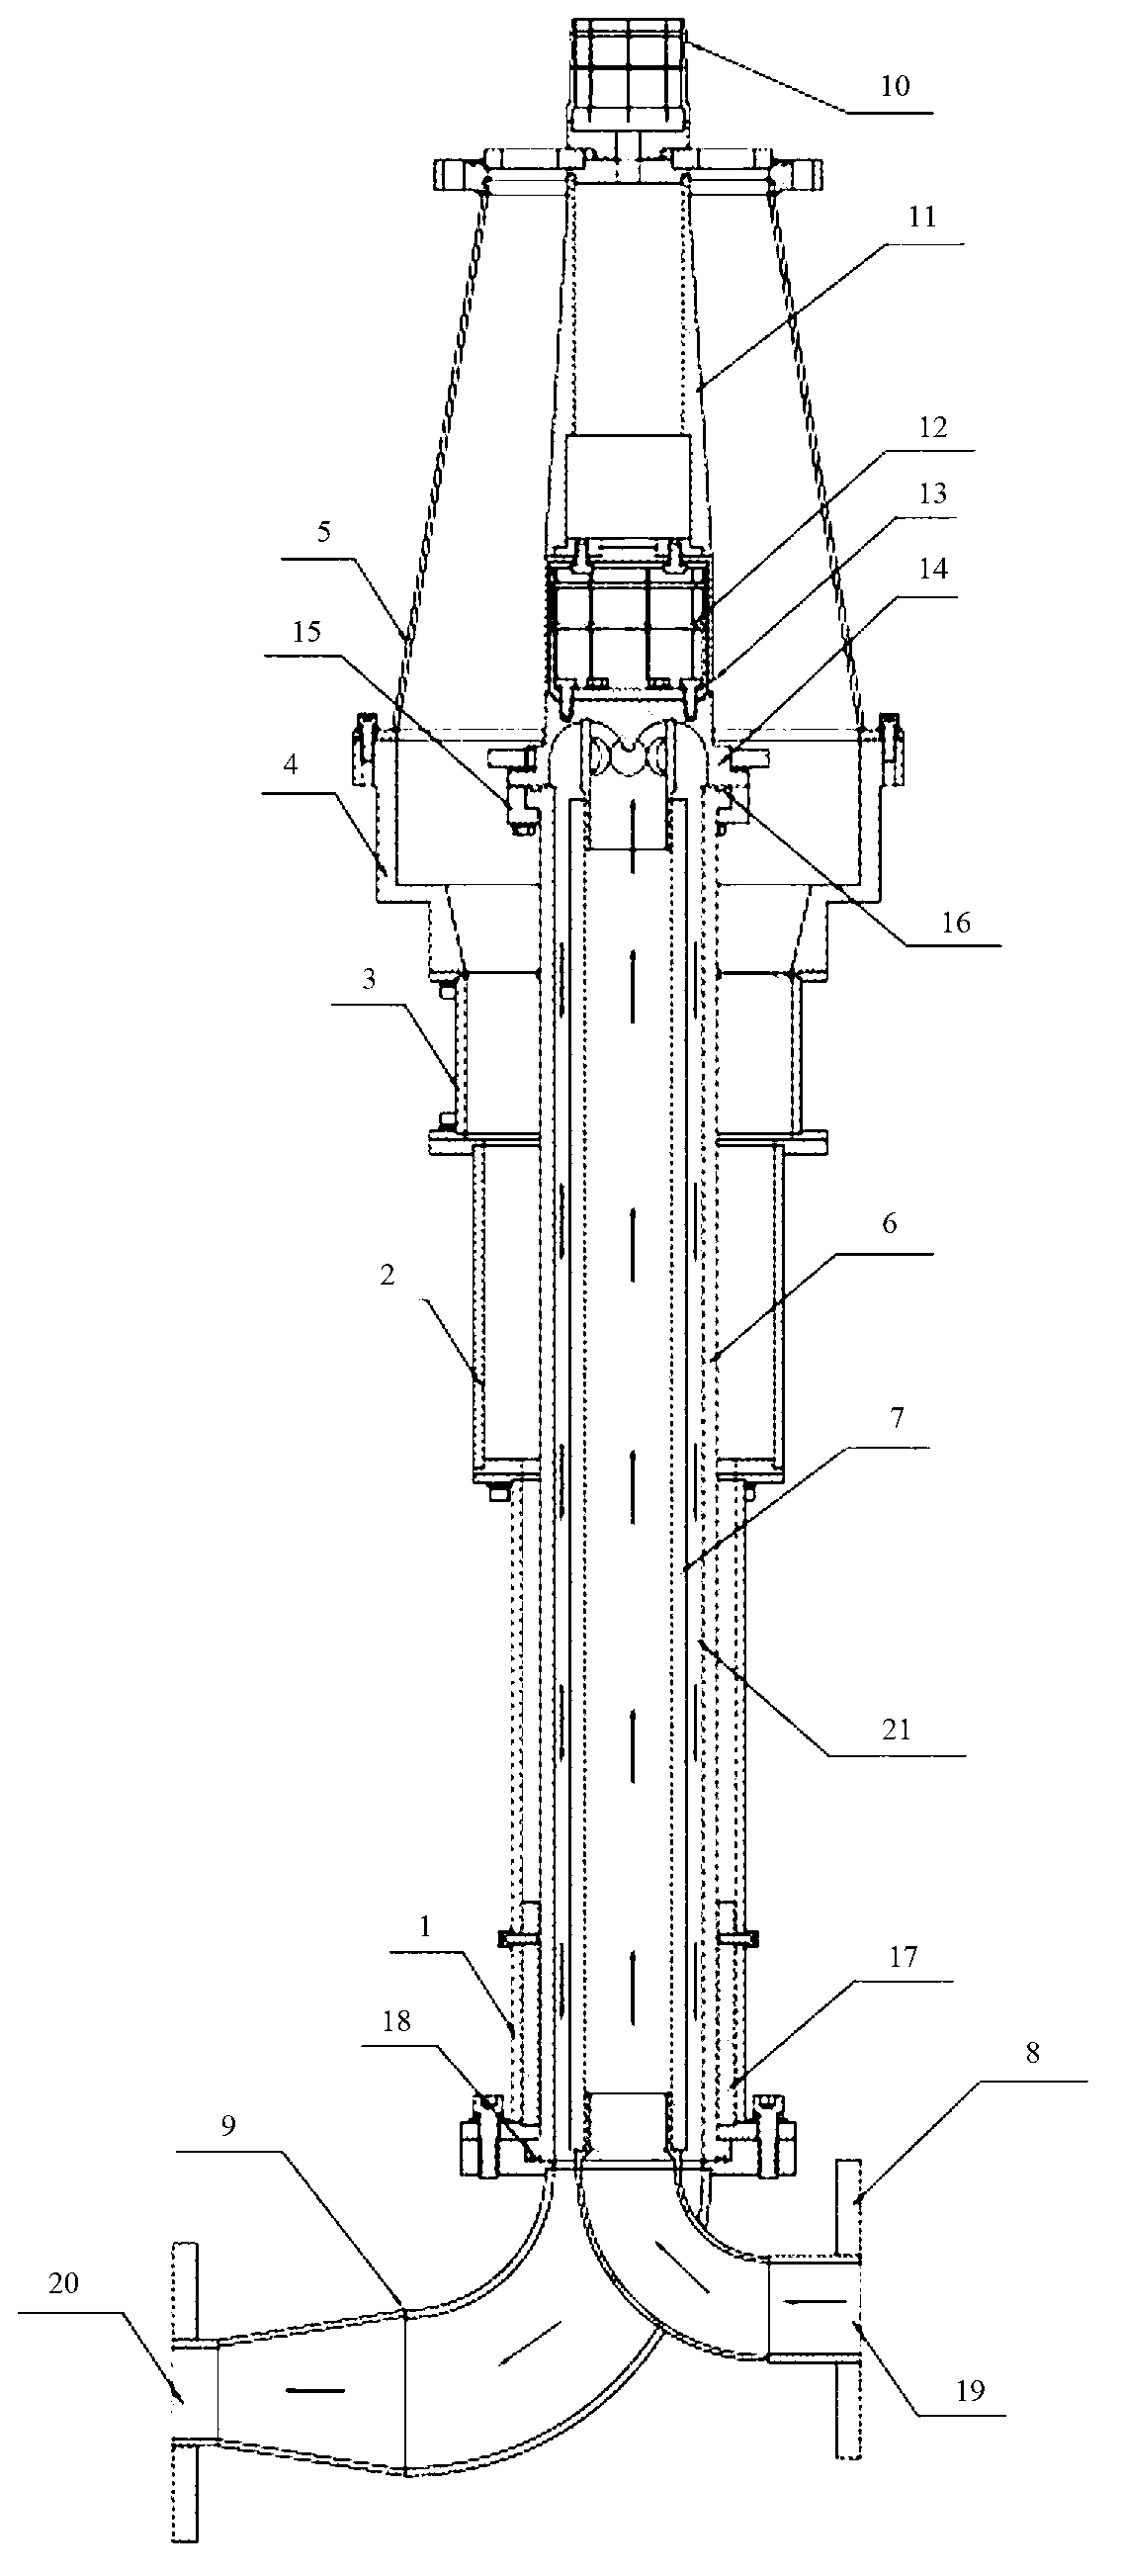 Water load body used for power source debugging, and water load body system